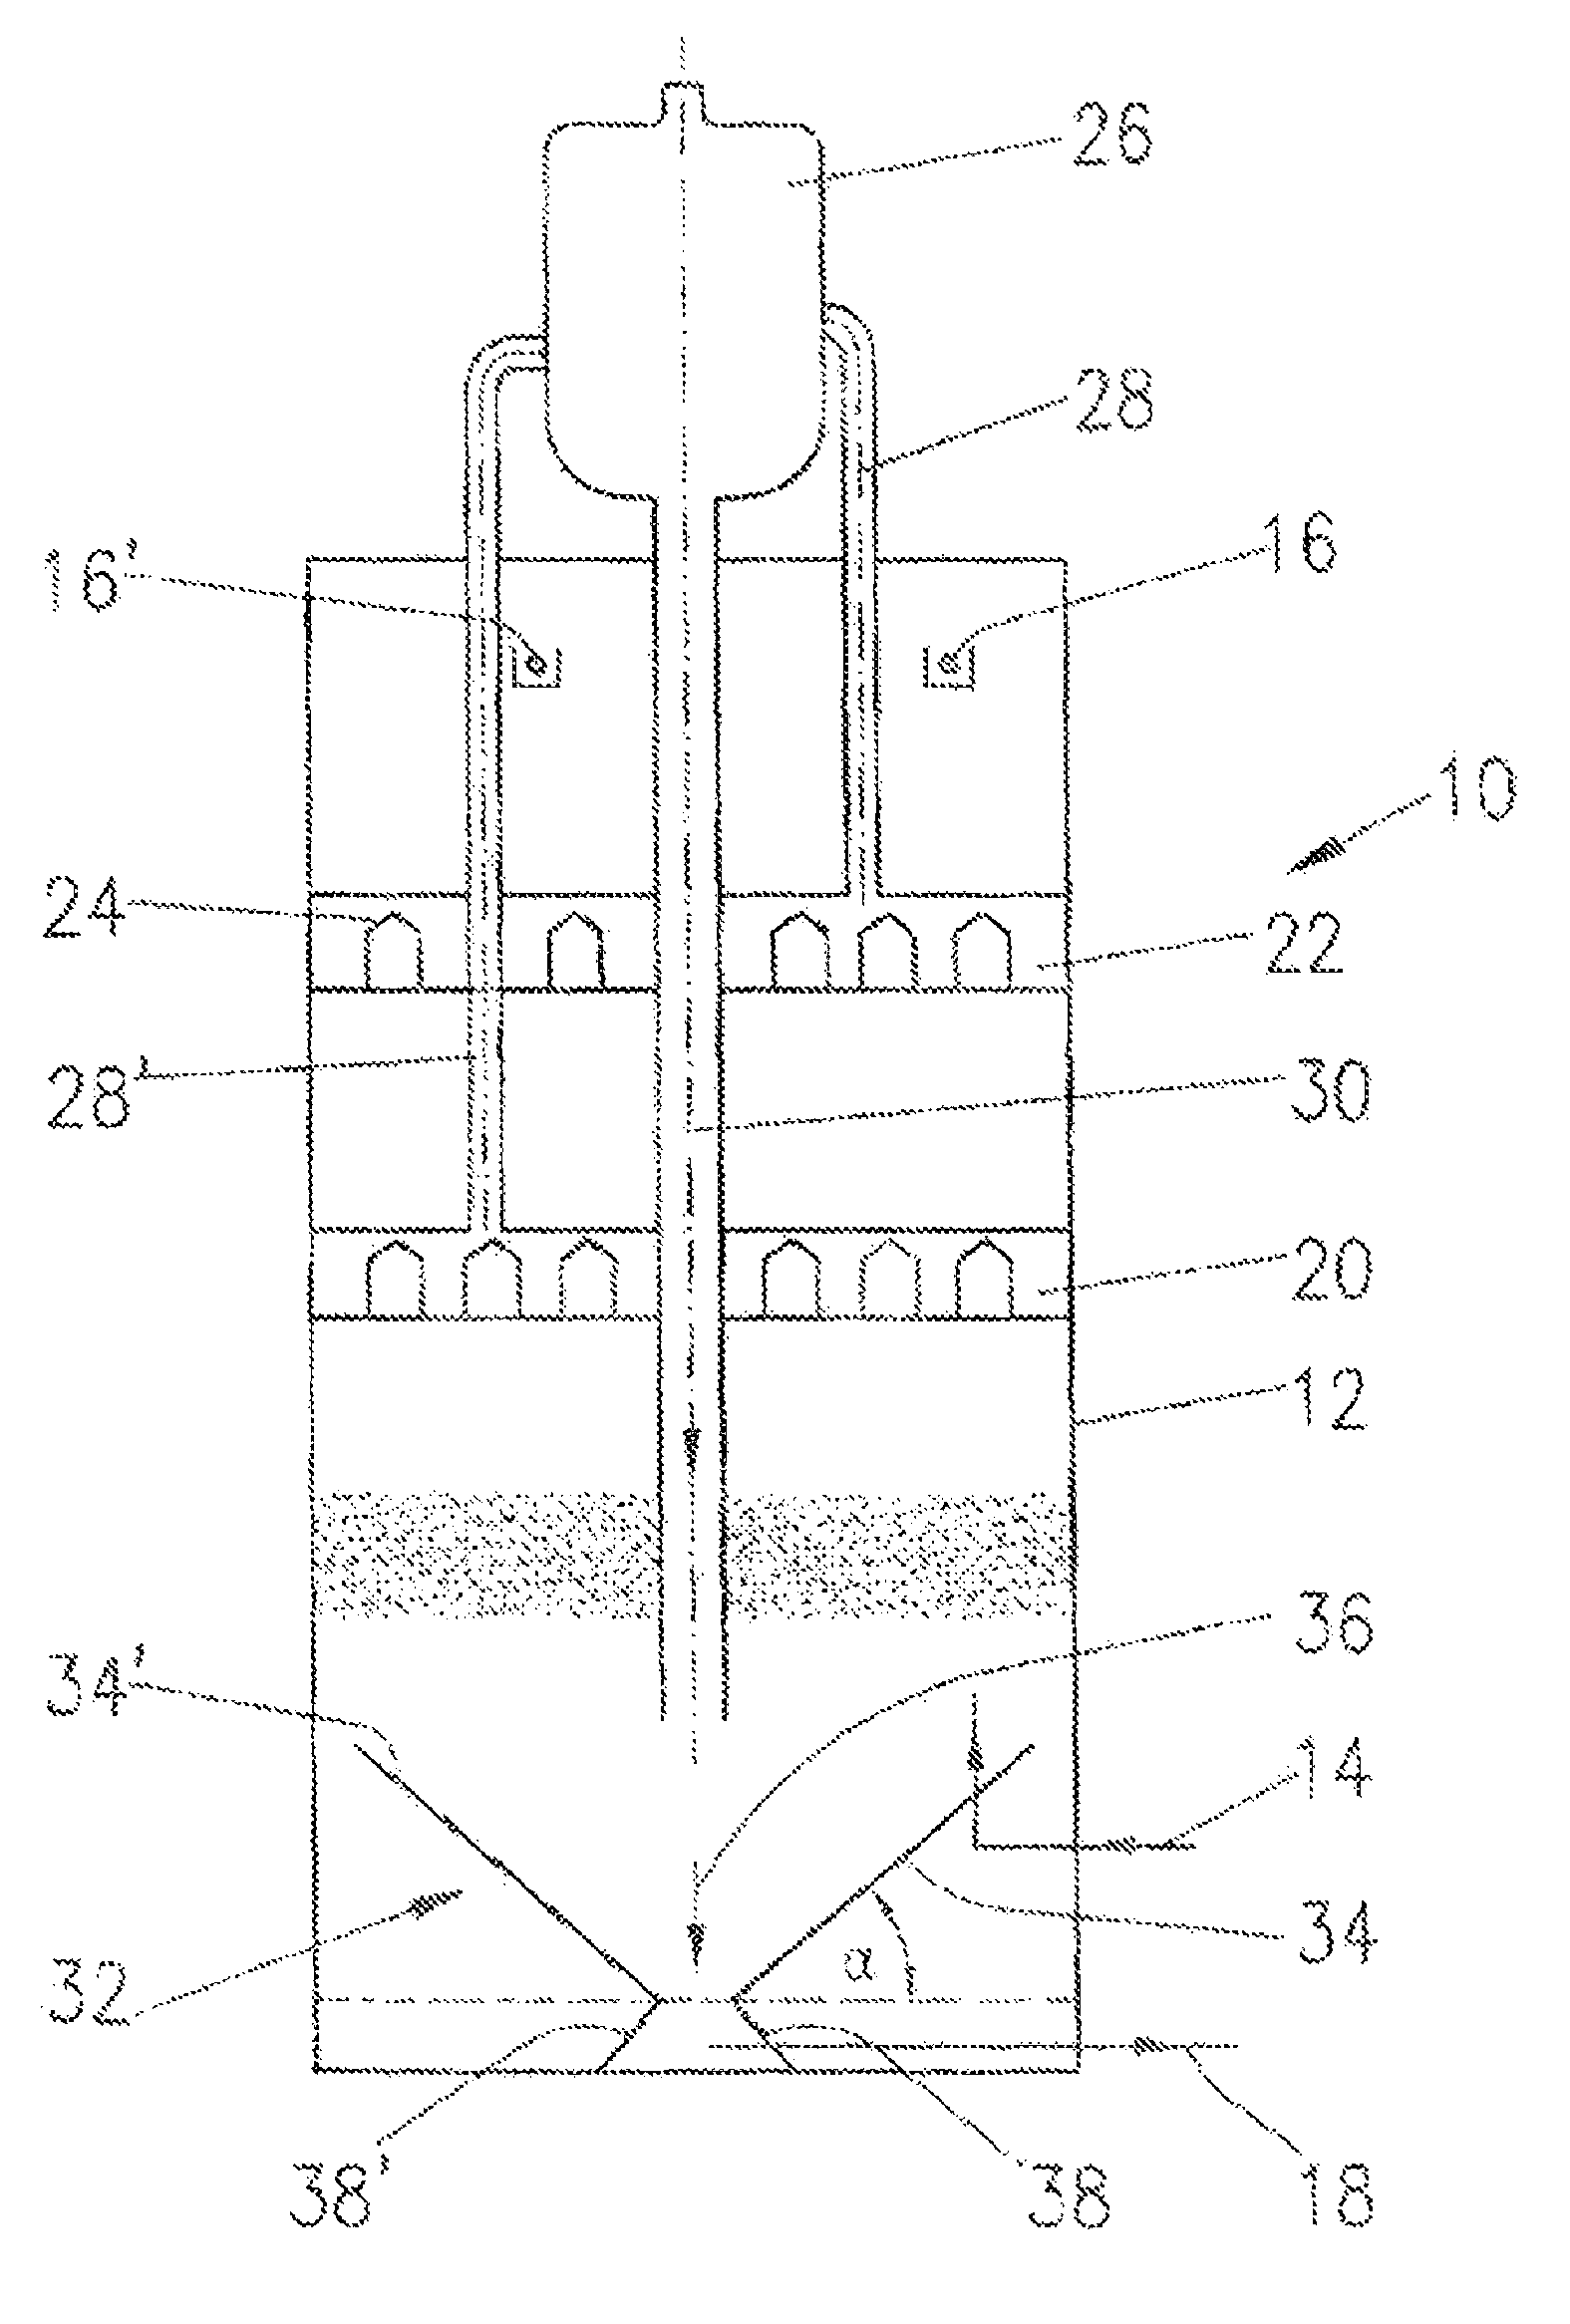 Sludge extraction system for biological waste water reactors